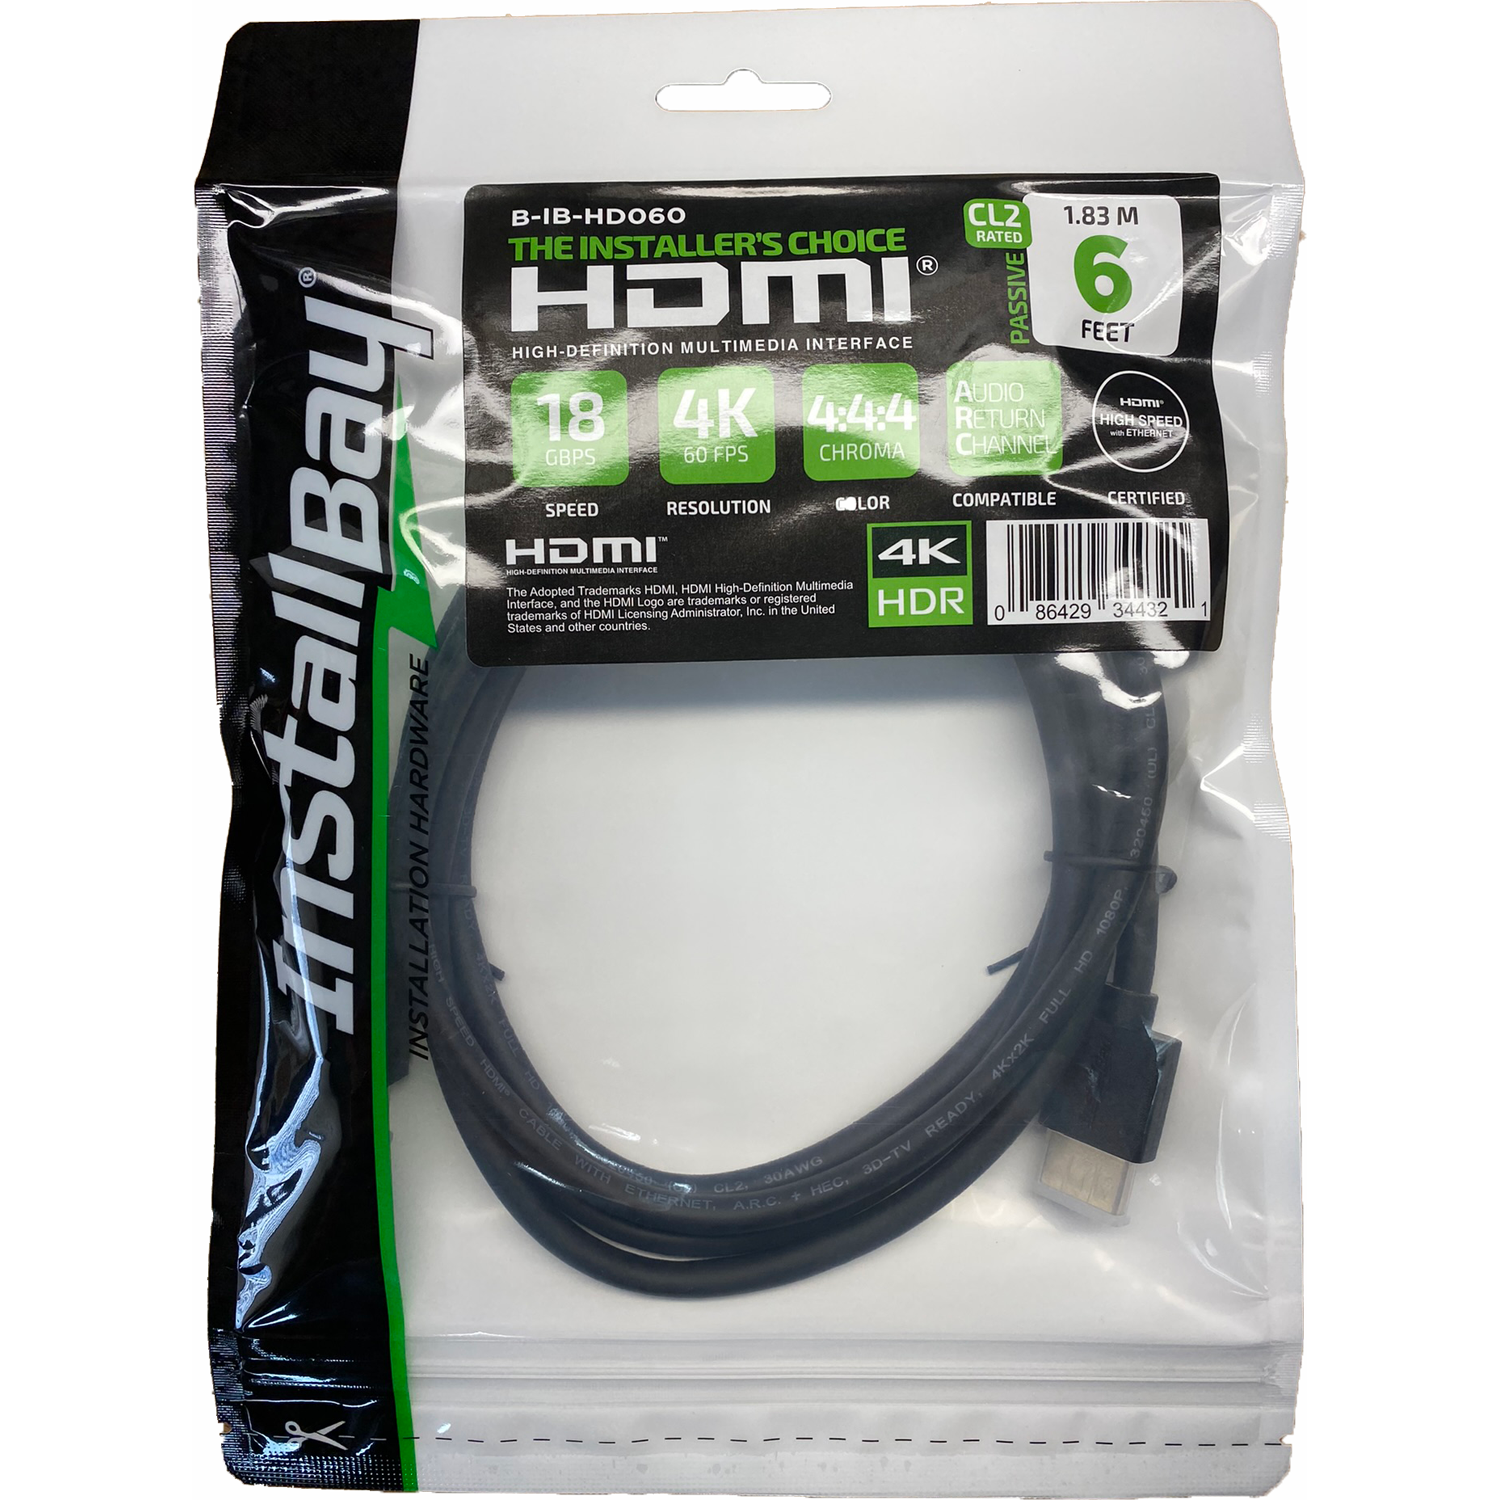 ETHEREAL IB-HD060 6ft 4K HDR up to 18Gbps HDMI Cable